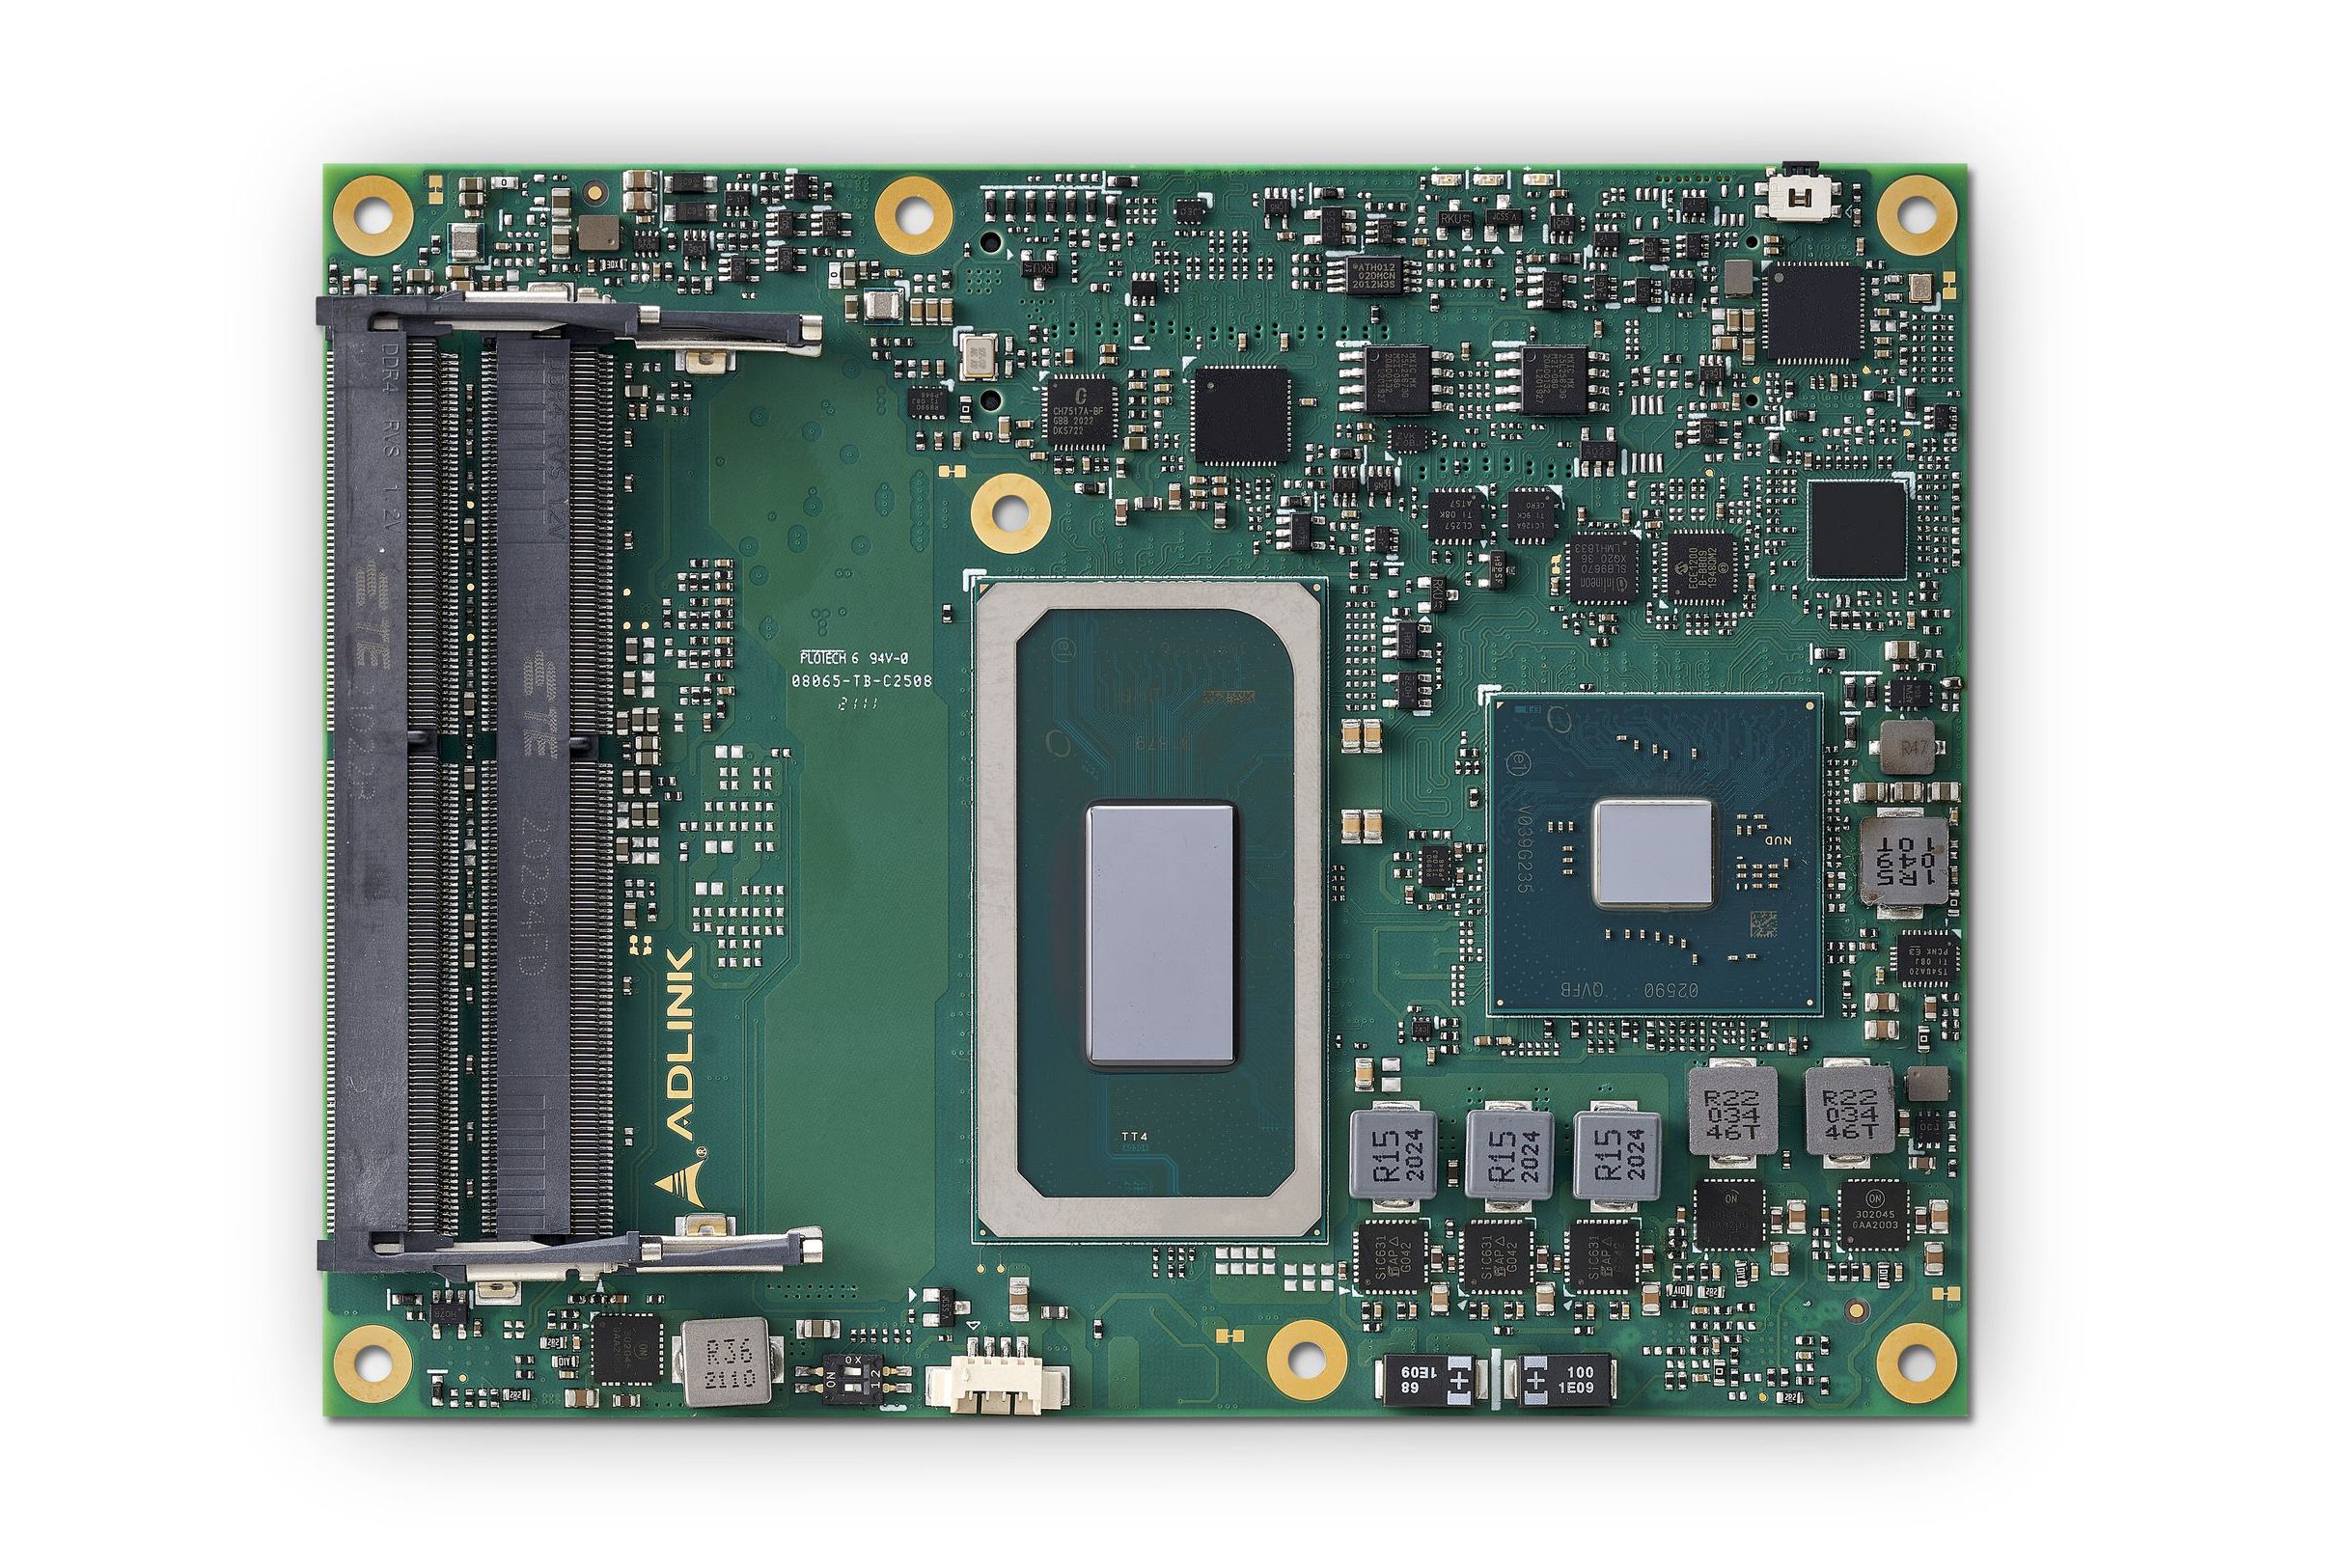 ADLINK Launches First COM Express Module Featuring Intel® Core™, Xeon® and Celeron® 6000 processors